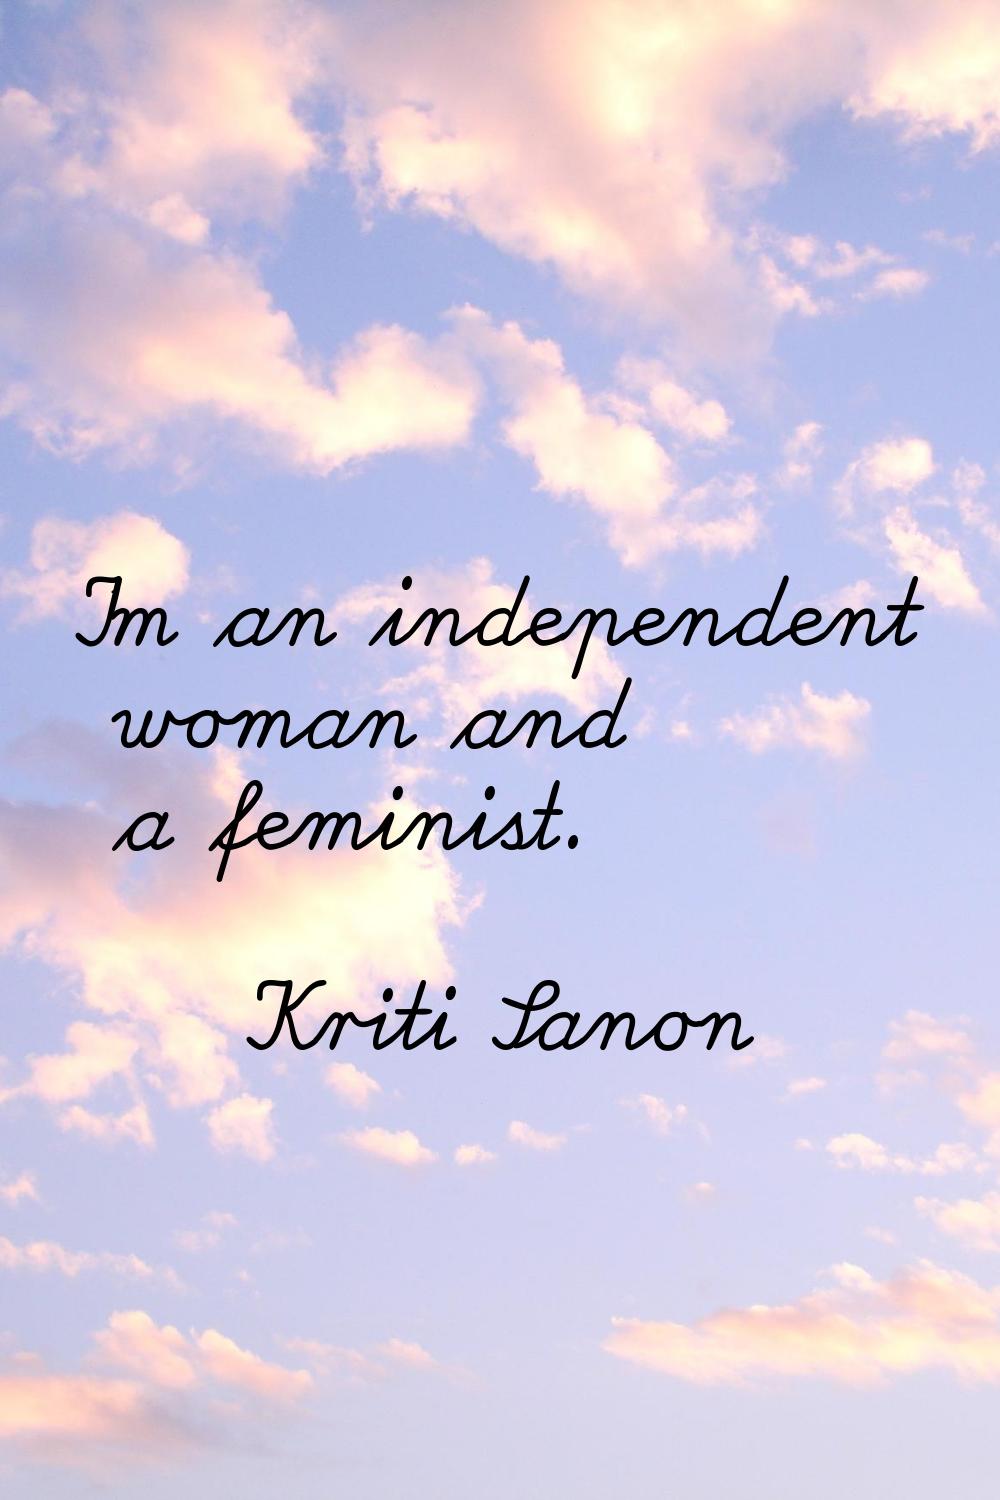 I'm an independent woman and a feminist.